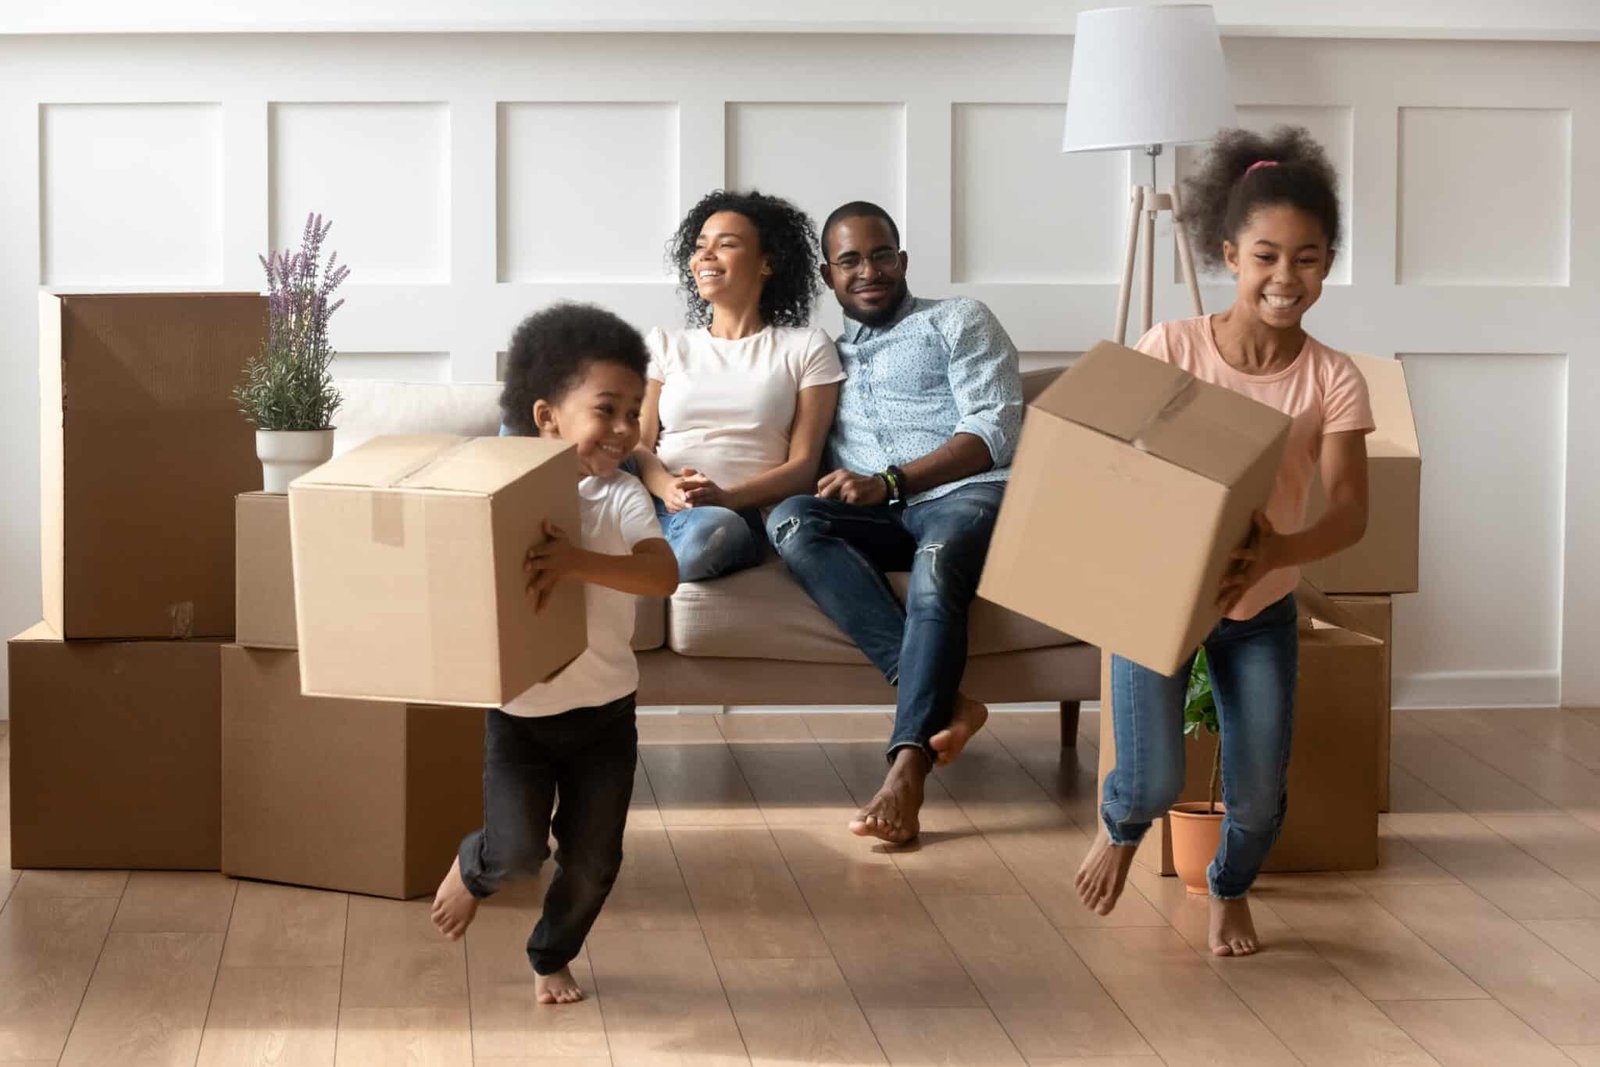 Family relax as they move into their first home